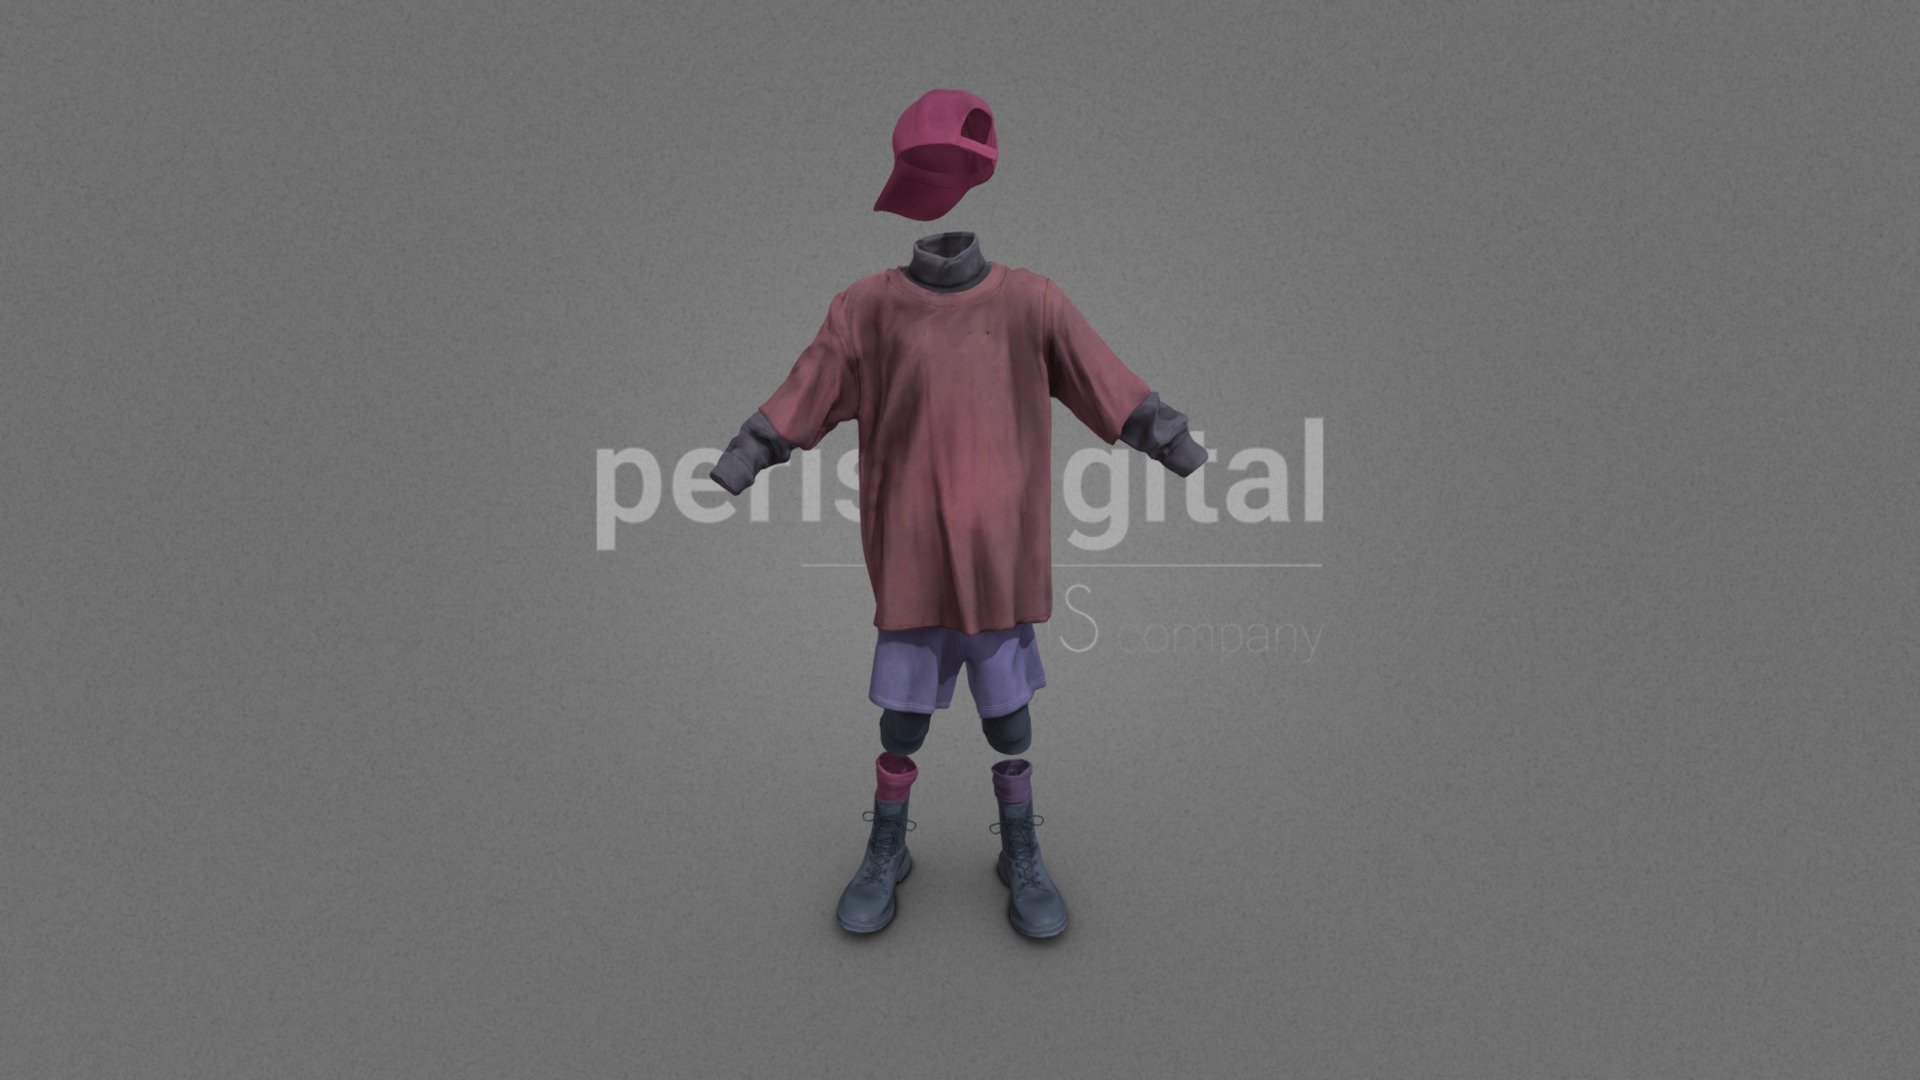 Red cap, grey sweater under a red shirt, violet short pants, different color sockers and black boots.

PERIS DIGITAL HIGH QUALITY 3D CLOTHING They are optimized for use in medium/high poly 3D scenes and optimized for rendering. We do not include characters, but they are positioned for you to include and adjust your own character. They have a LOW Poly Mesh (LODRIG) inside the Blender file (included in the AdditionalFiles), which you can use for vertex weighting or cloth simulation and thus, make the transfer of vertices or property masks from the LOW to the HIGH model. We have included in AddiotionalFiles, the texture maps in high resolution, as well as the Displacement maps in high resolution too, so you can perform extreme point of view with your 3D cameras. With the Blender file (included in AdditionalFiles) you will be able to edit any aspect of the set . Enjoy it!

Web: https://peris.digital/ - Urban Series - Street Boy 01 - Buy Royalty Free 3D model by Peris Digital (@perisdigital) 3d model